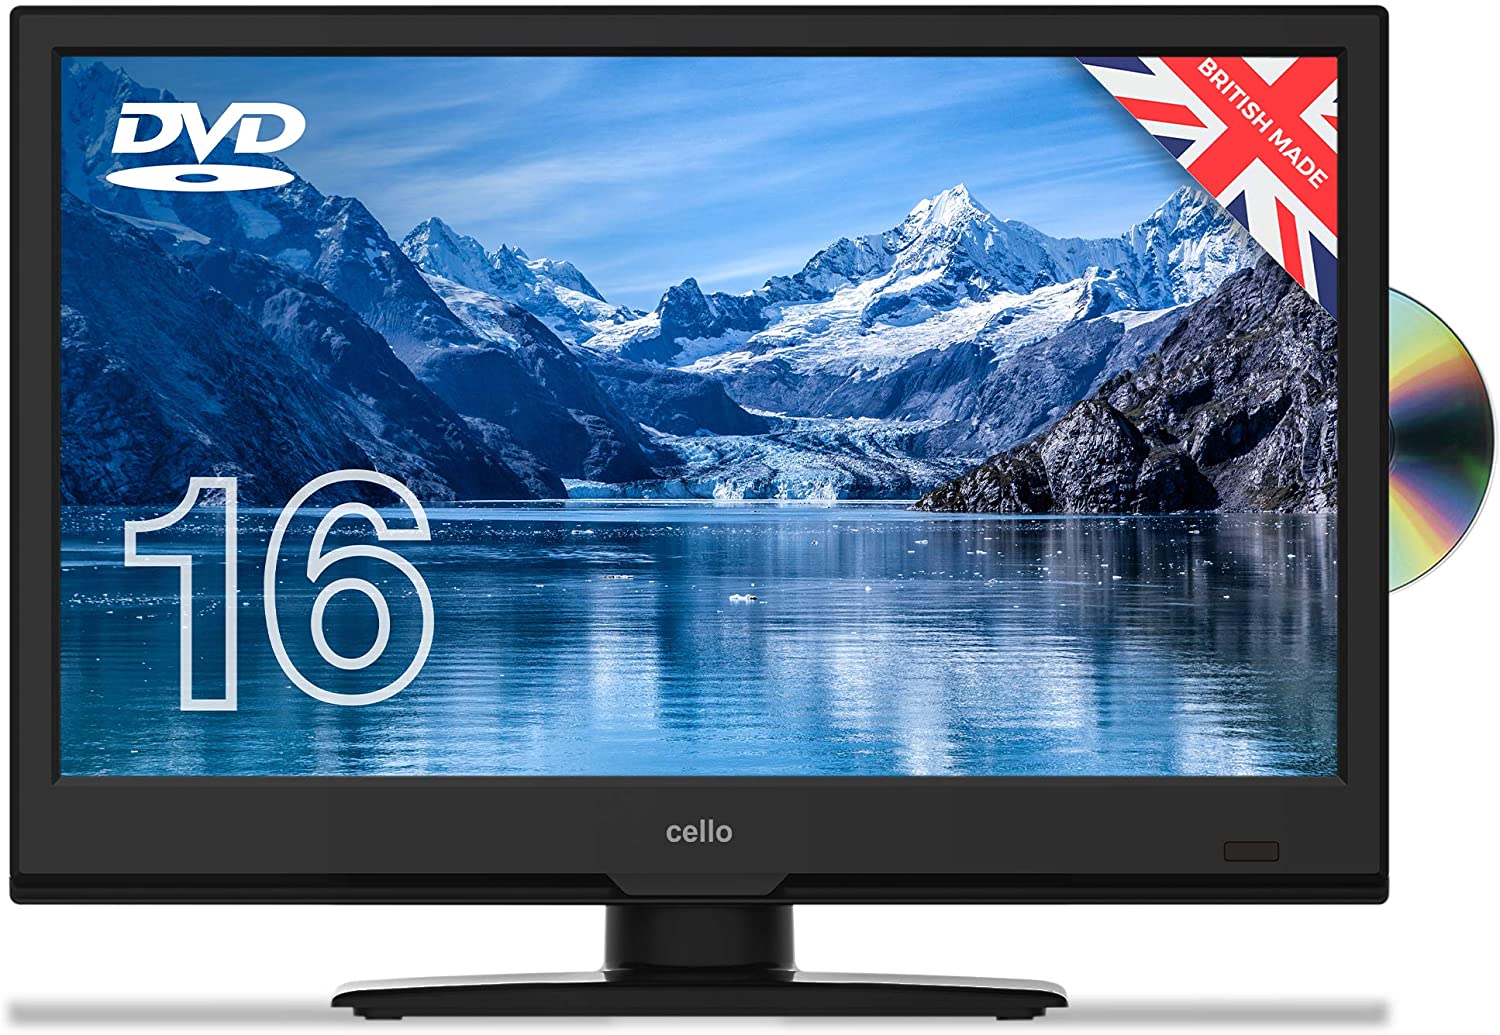 Cello 16 Full HD LED TV/DVD Freeview HD and Satellite Tuner Made In The UK  - C1620FS